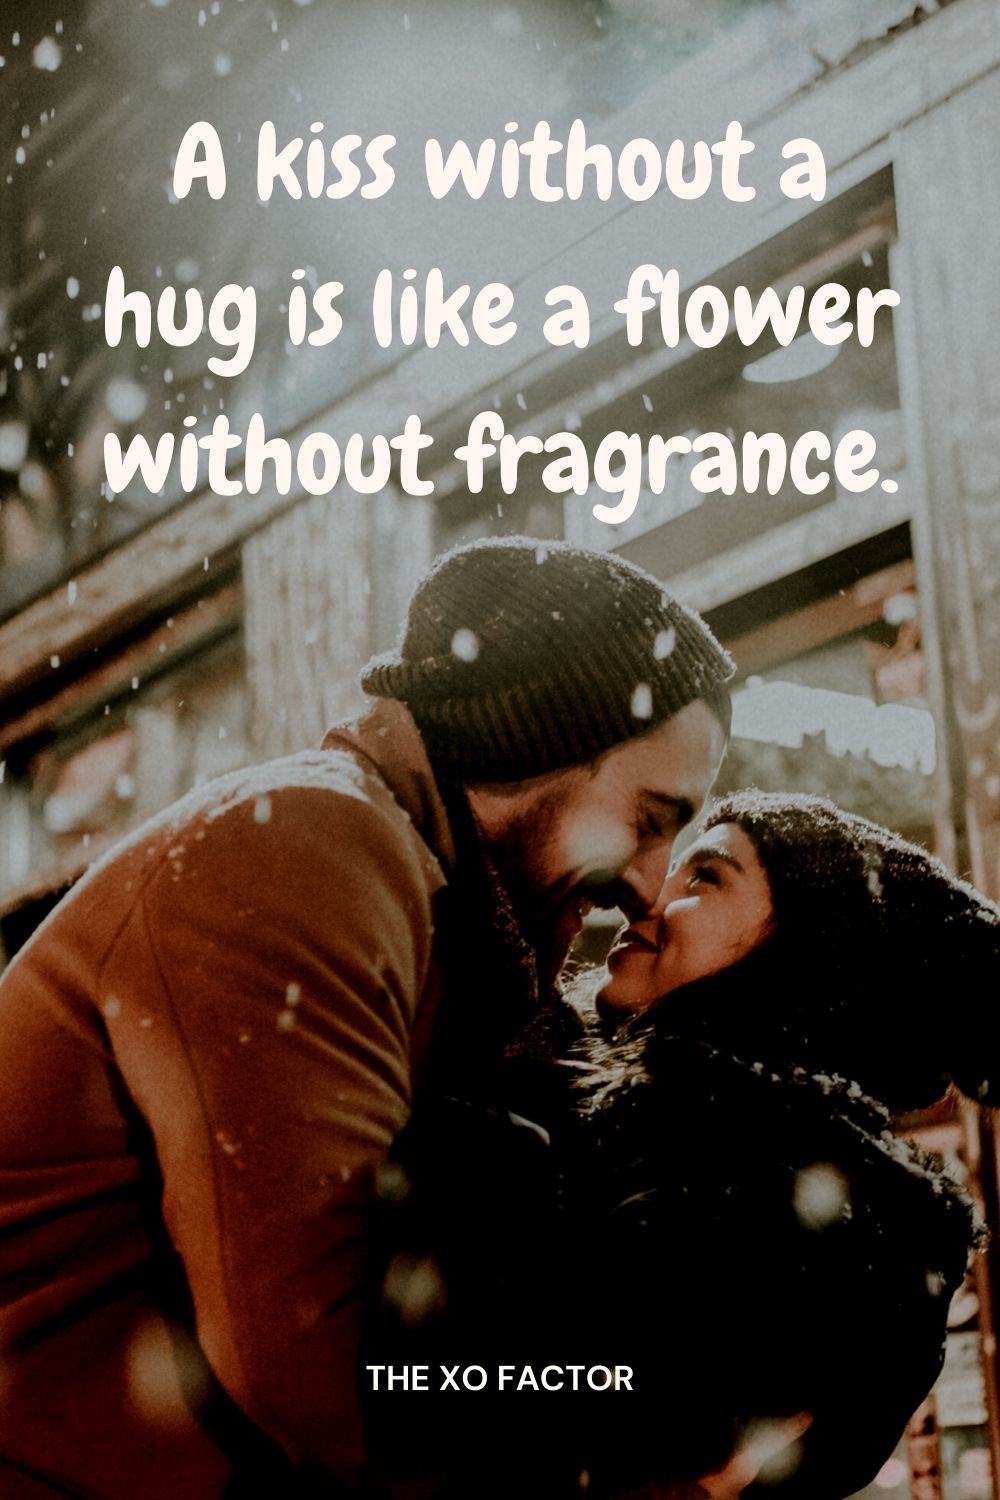 A kiss without a hug is like a flower without fragrance.